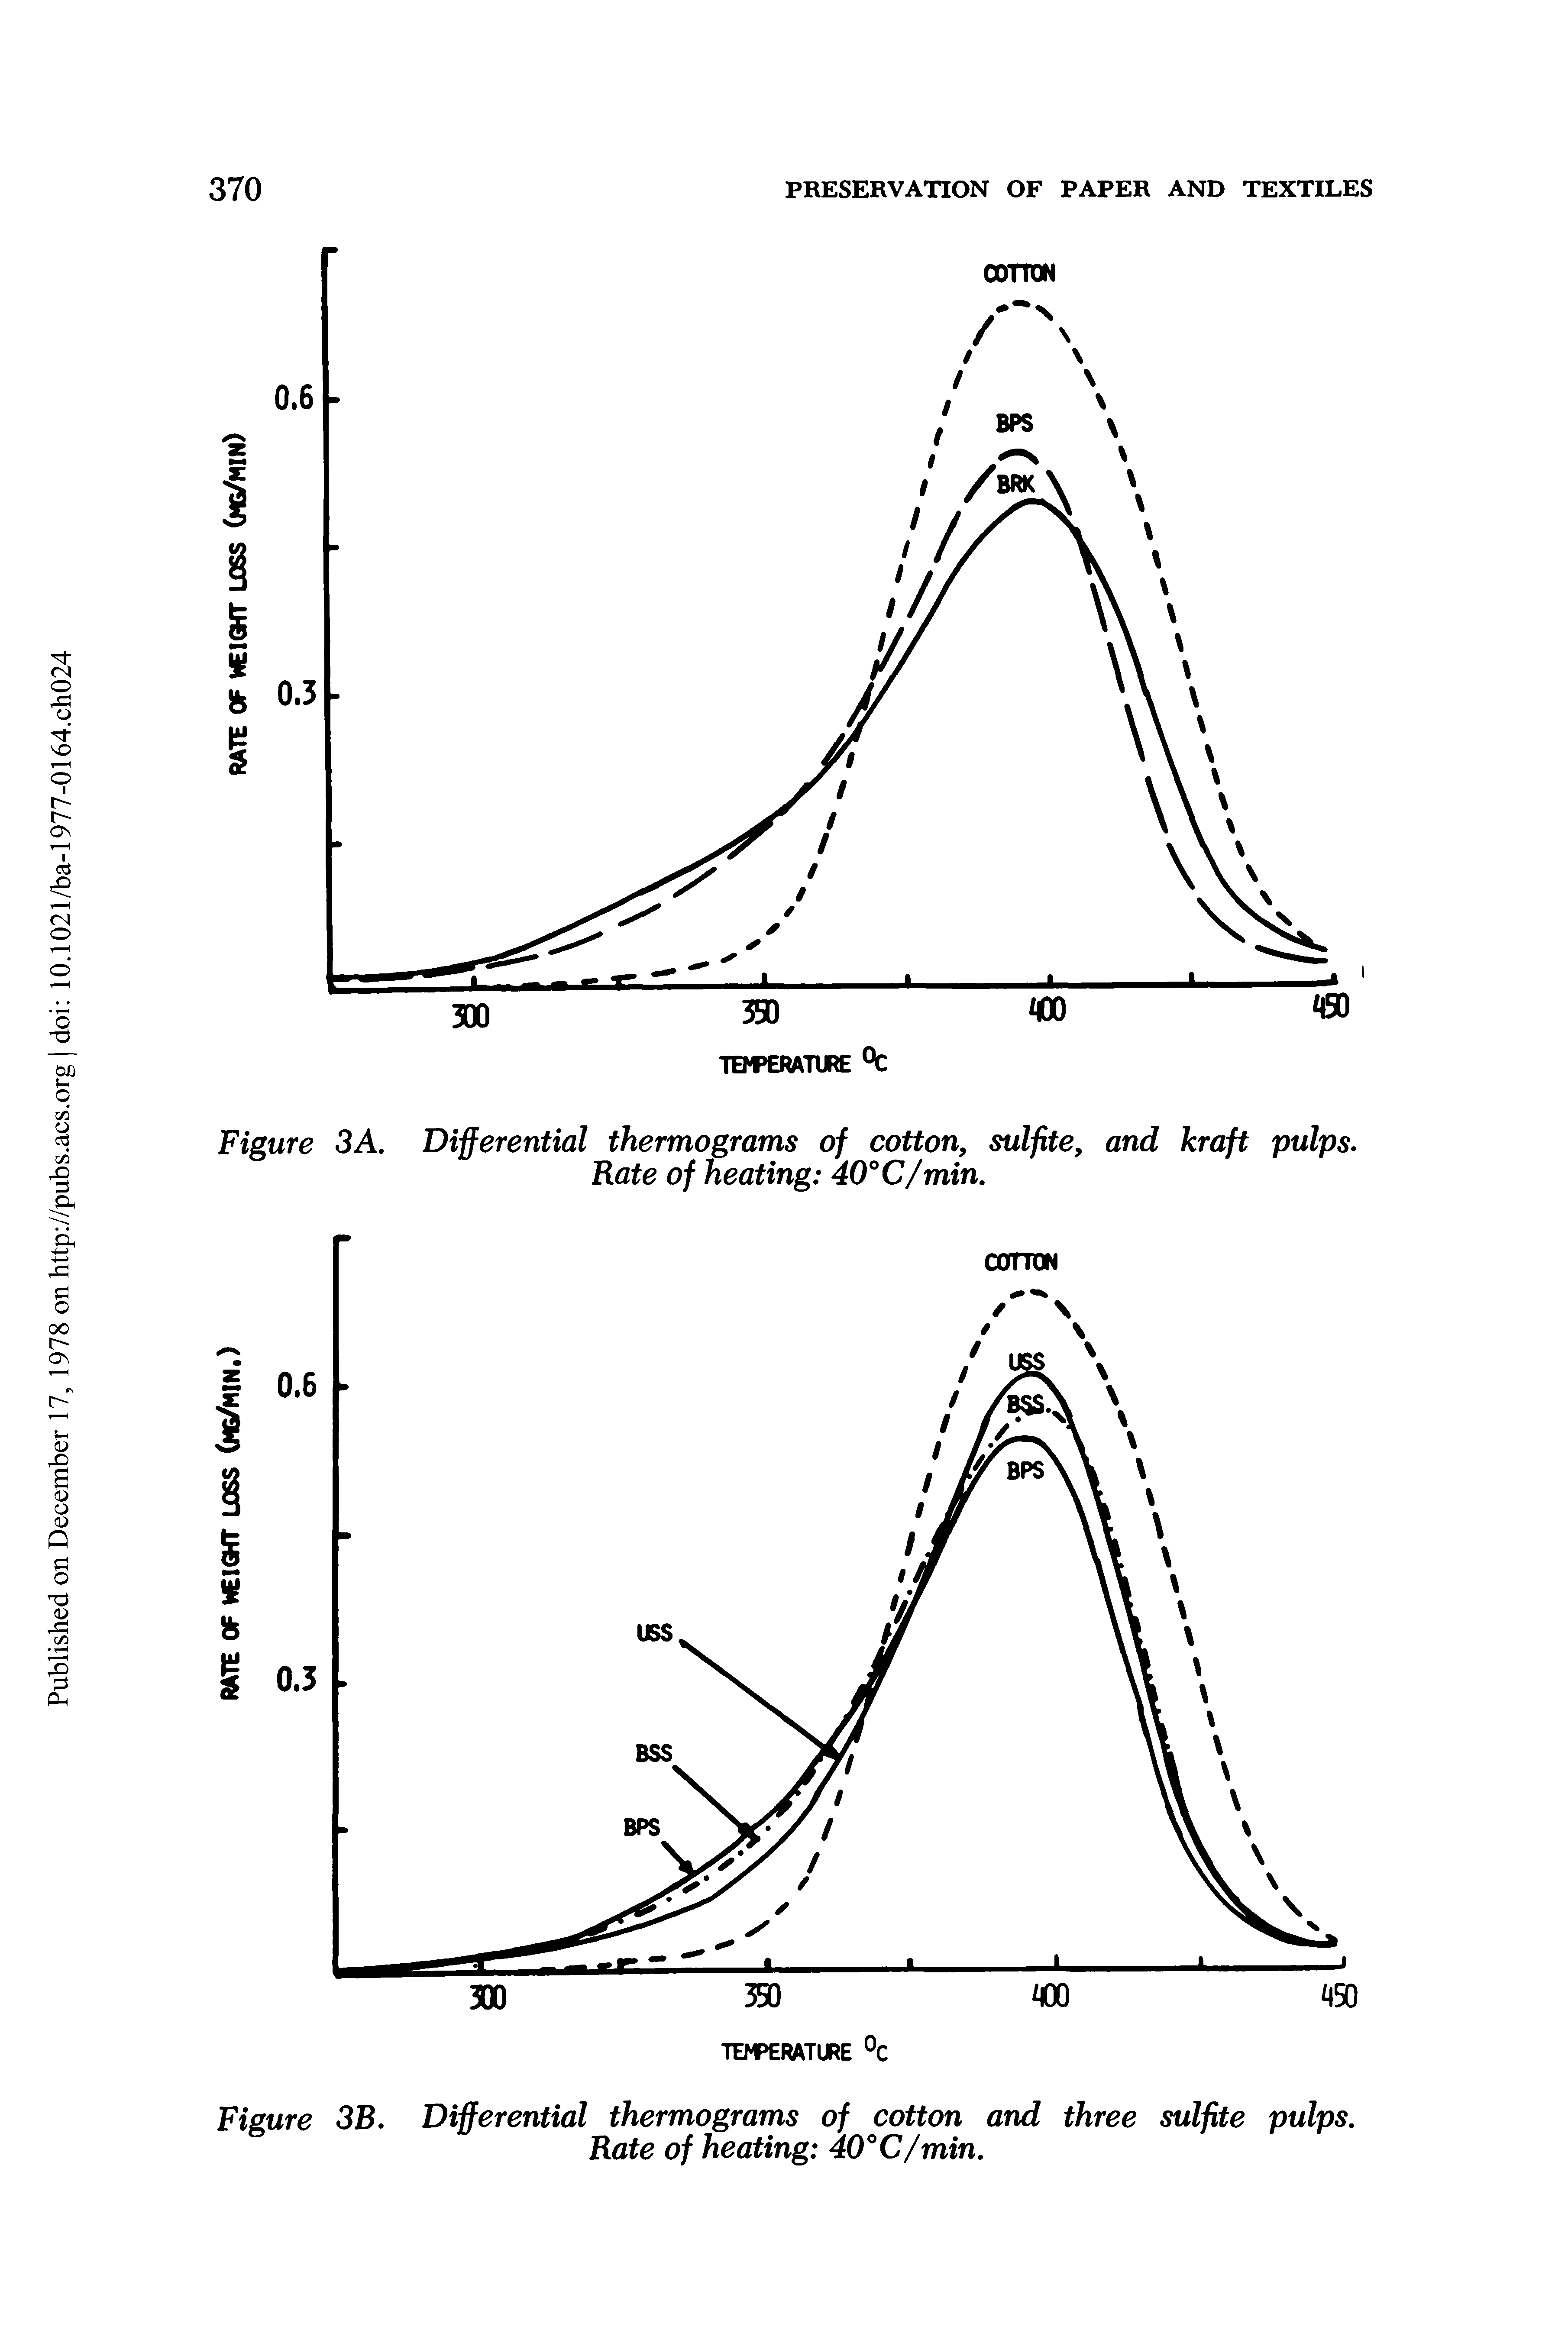 Figure 3 A. Differential thermograms of cotton, sulfite, and kraft pulps. Rate of heating 40°C/min.